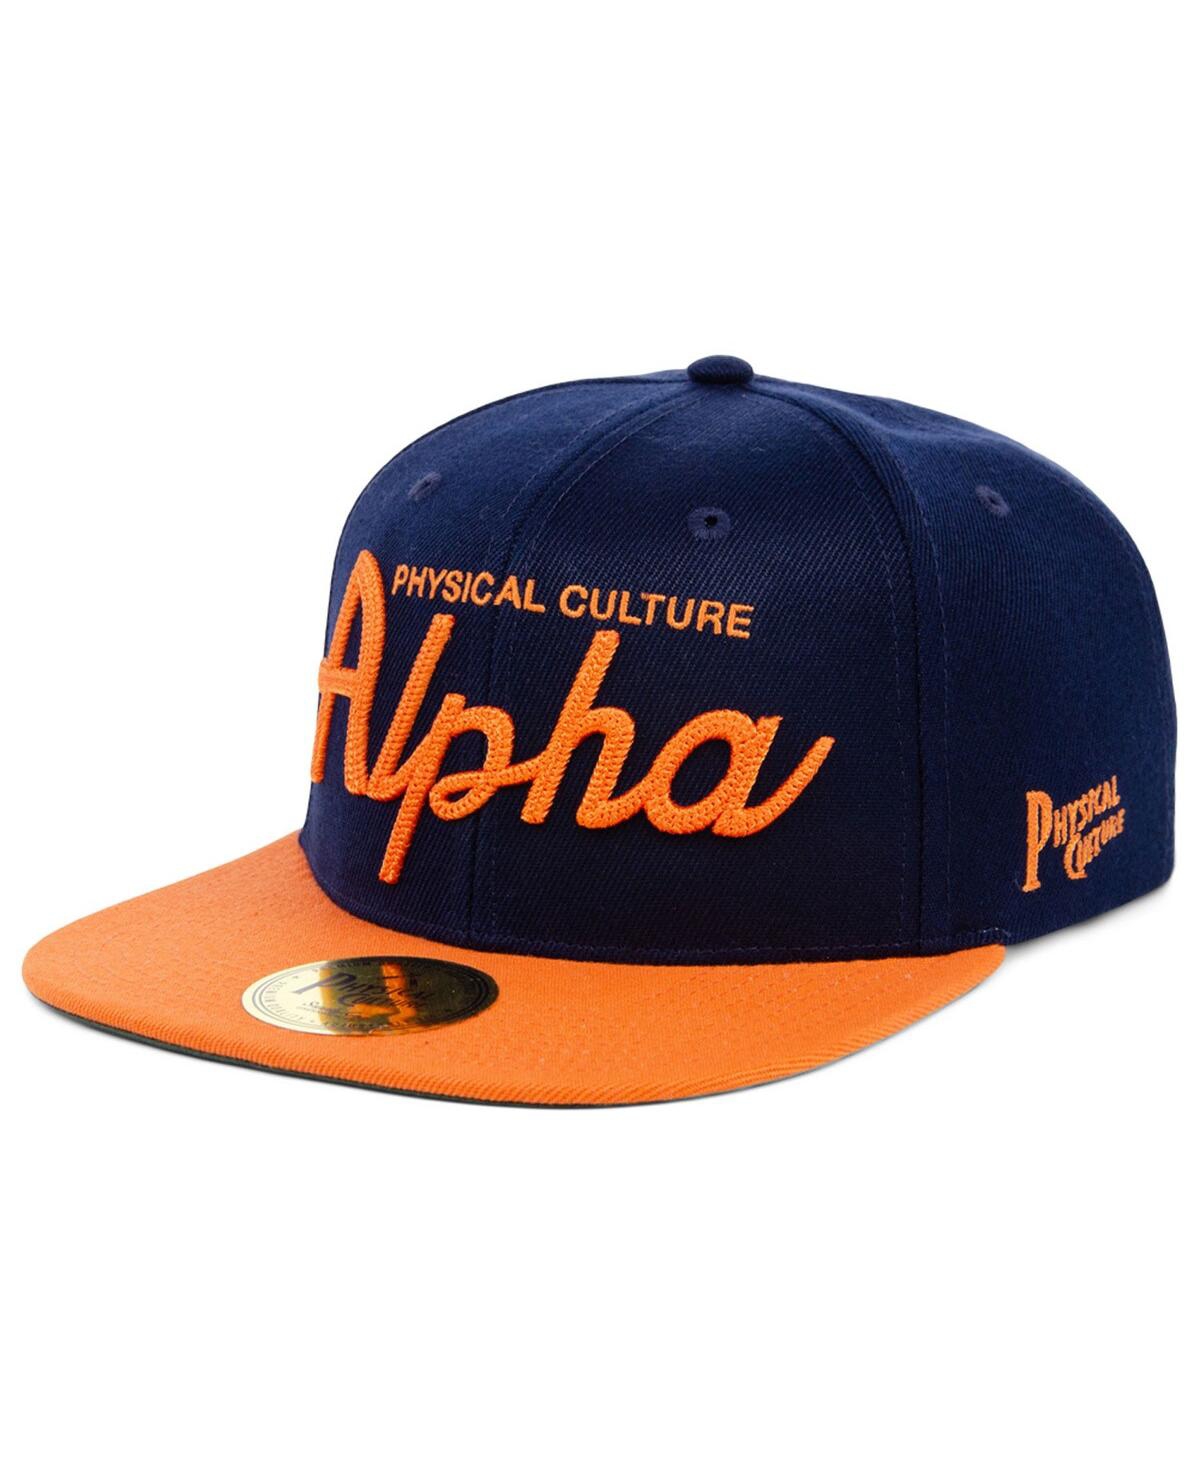 Men's Physical Culture Navy Alpha Physical Culture Club Black Fives Snapback Adjustable Hat - Navy